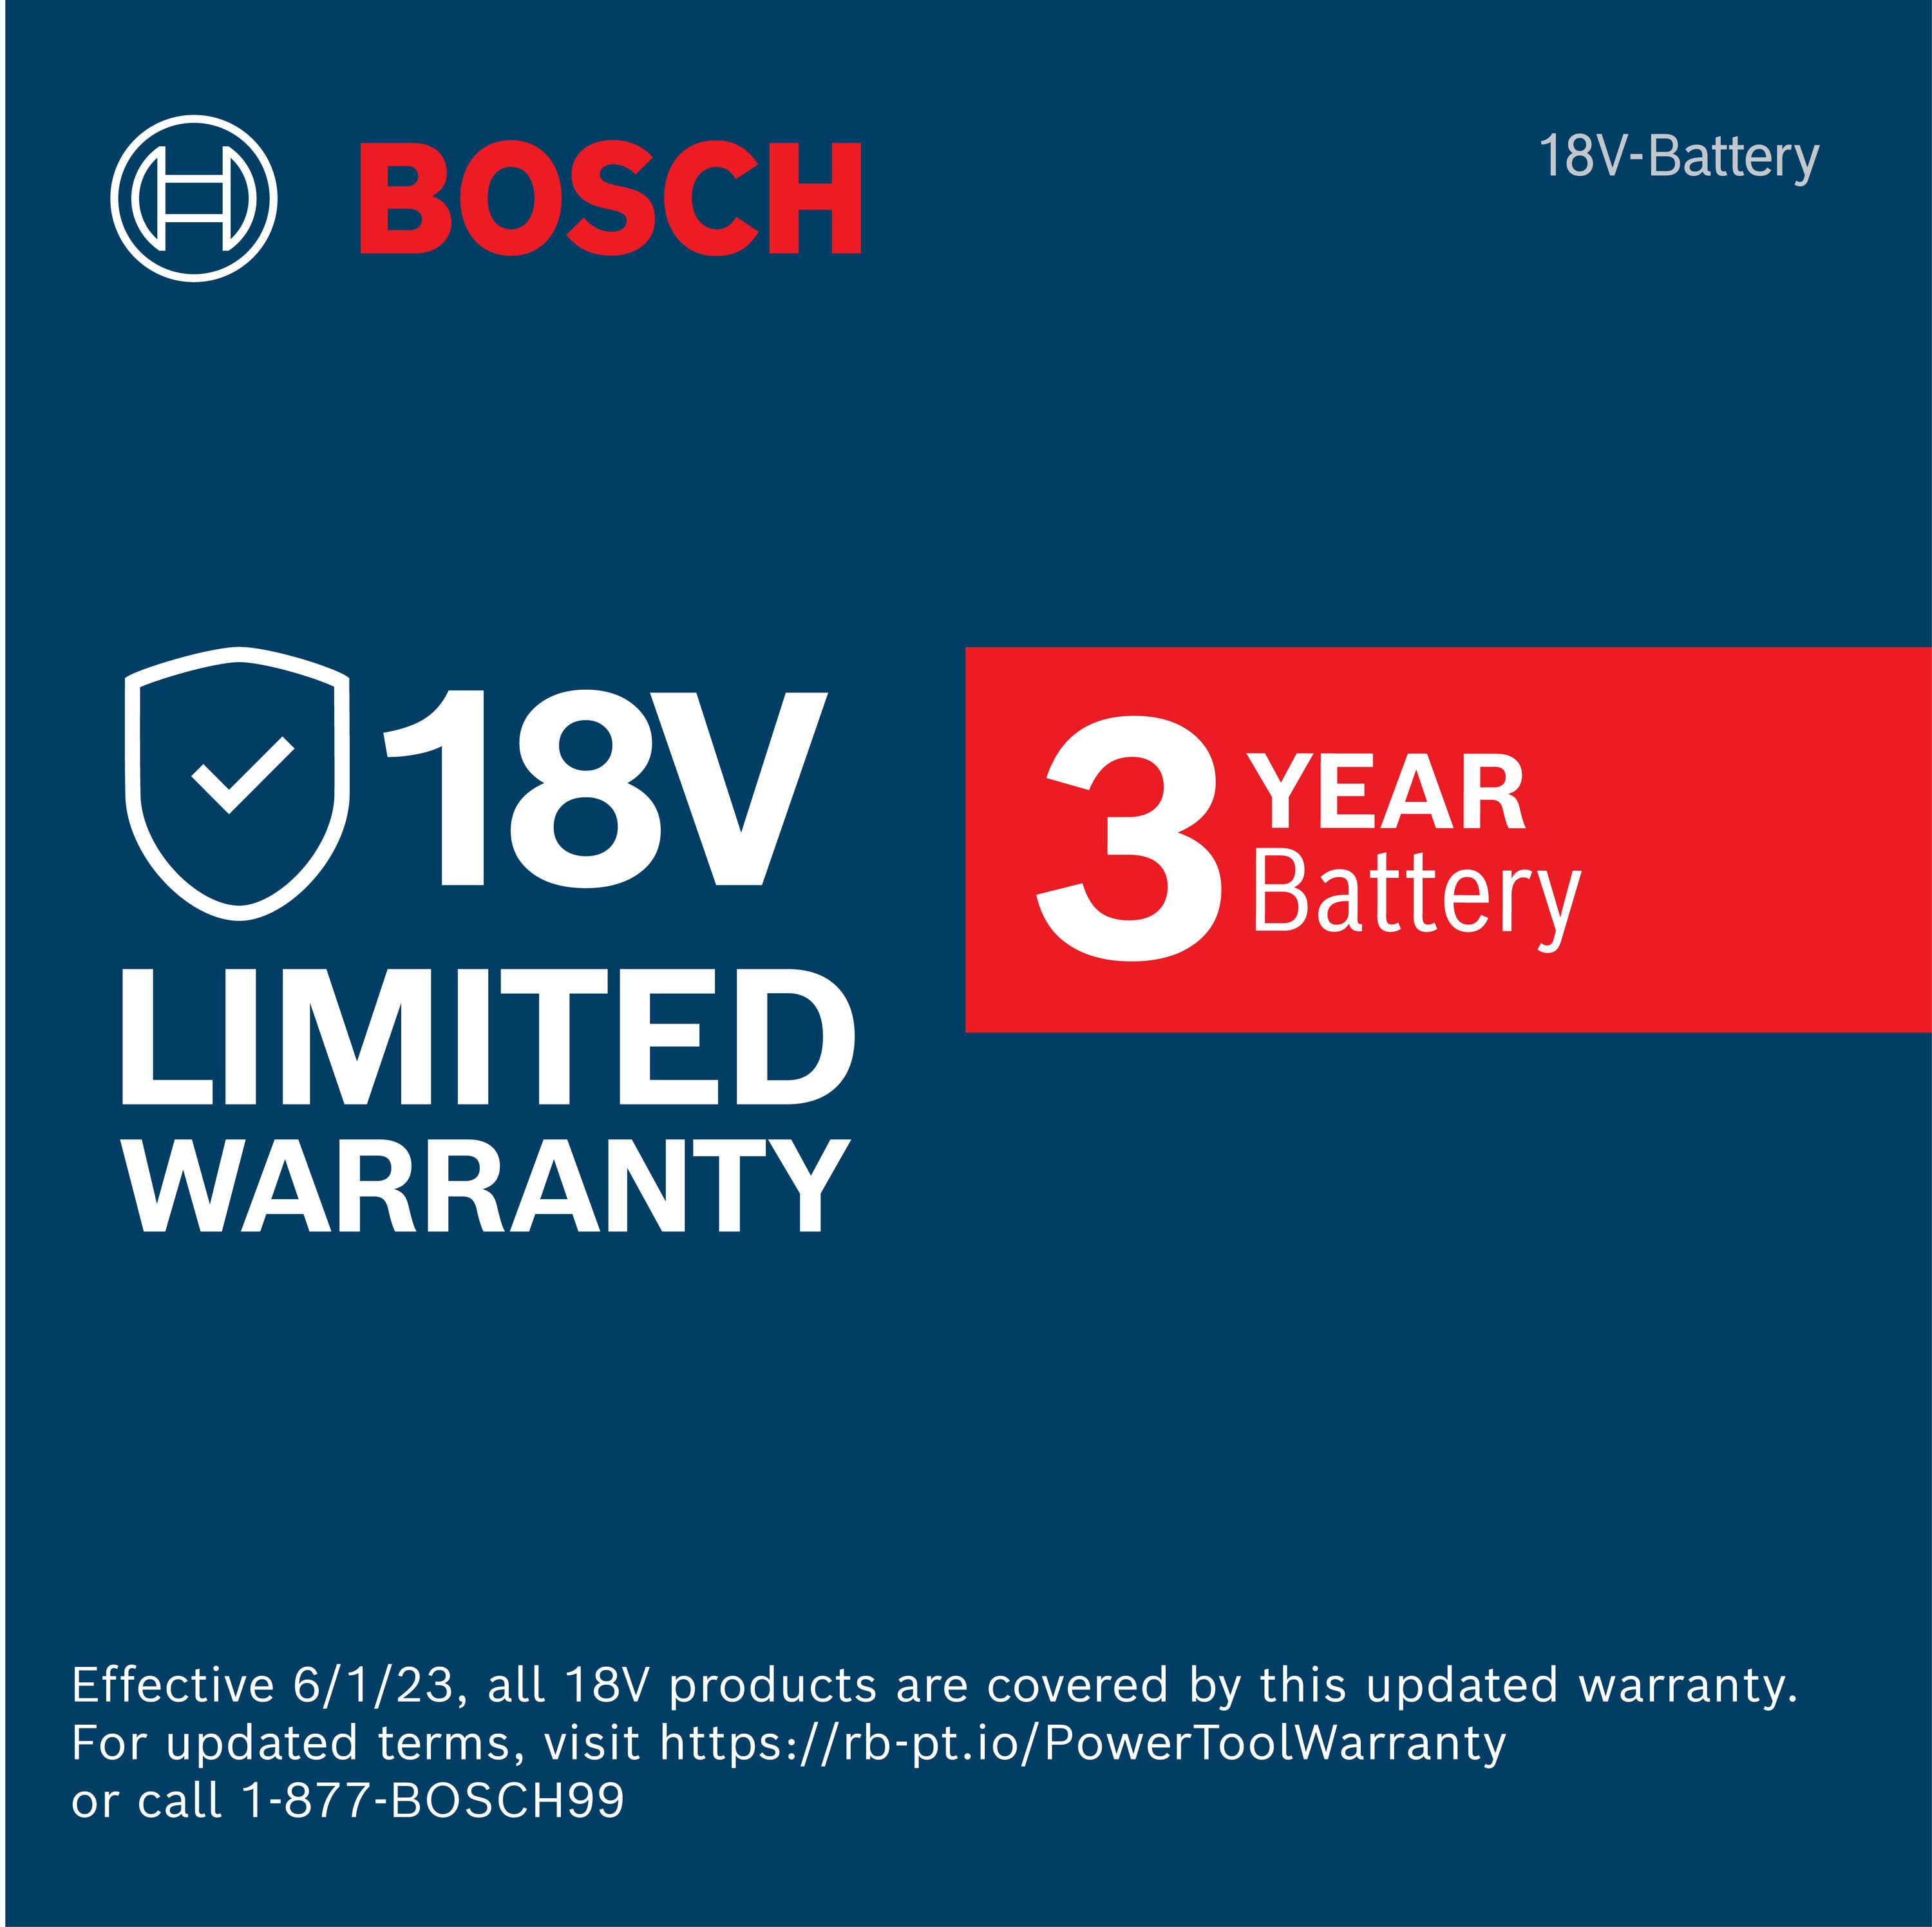 Bosch PROFACTOR 18-V 2-Pack Lithium-ion Battery (8 Ah) in the